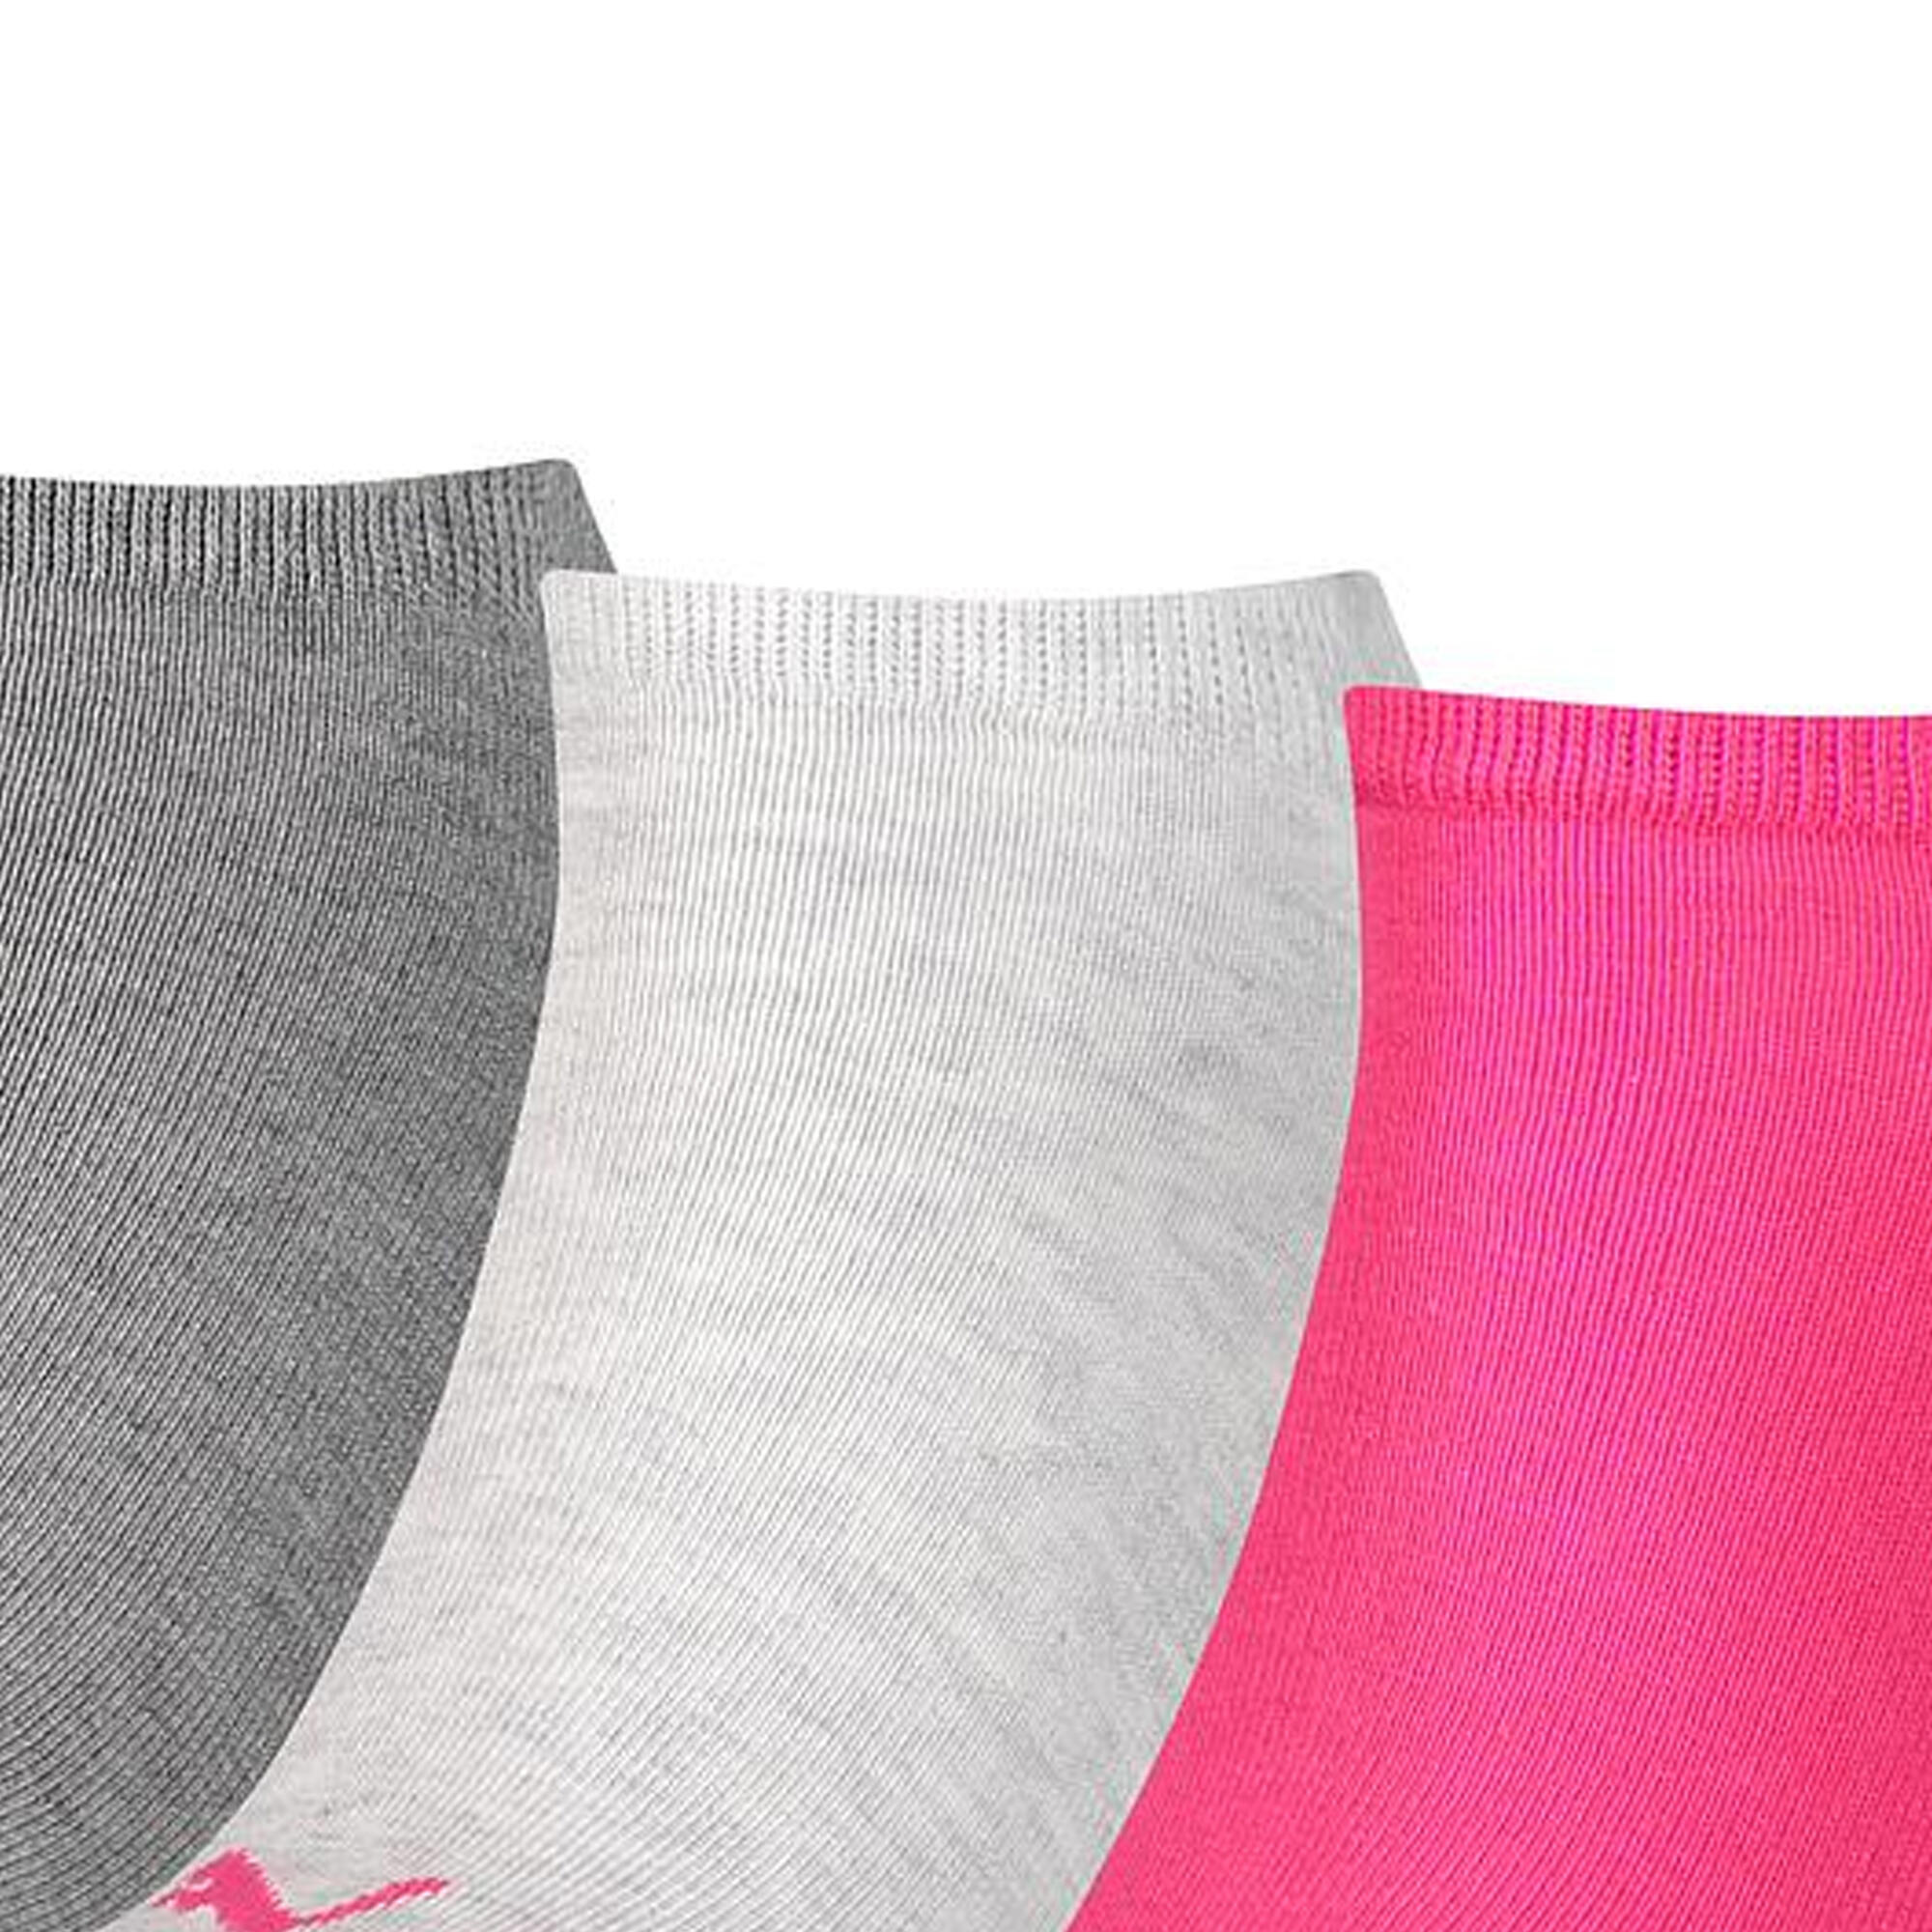 Unisex Adult Invisible Socks (Pack of 3) (Pink/Grey/Charcoal Grey) 3/3